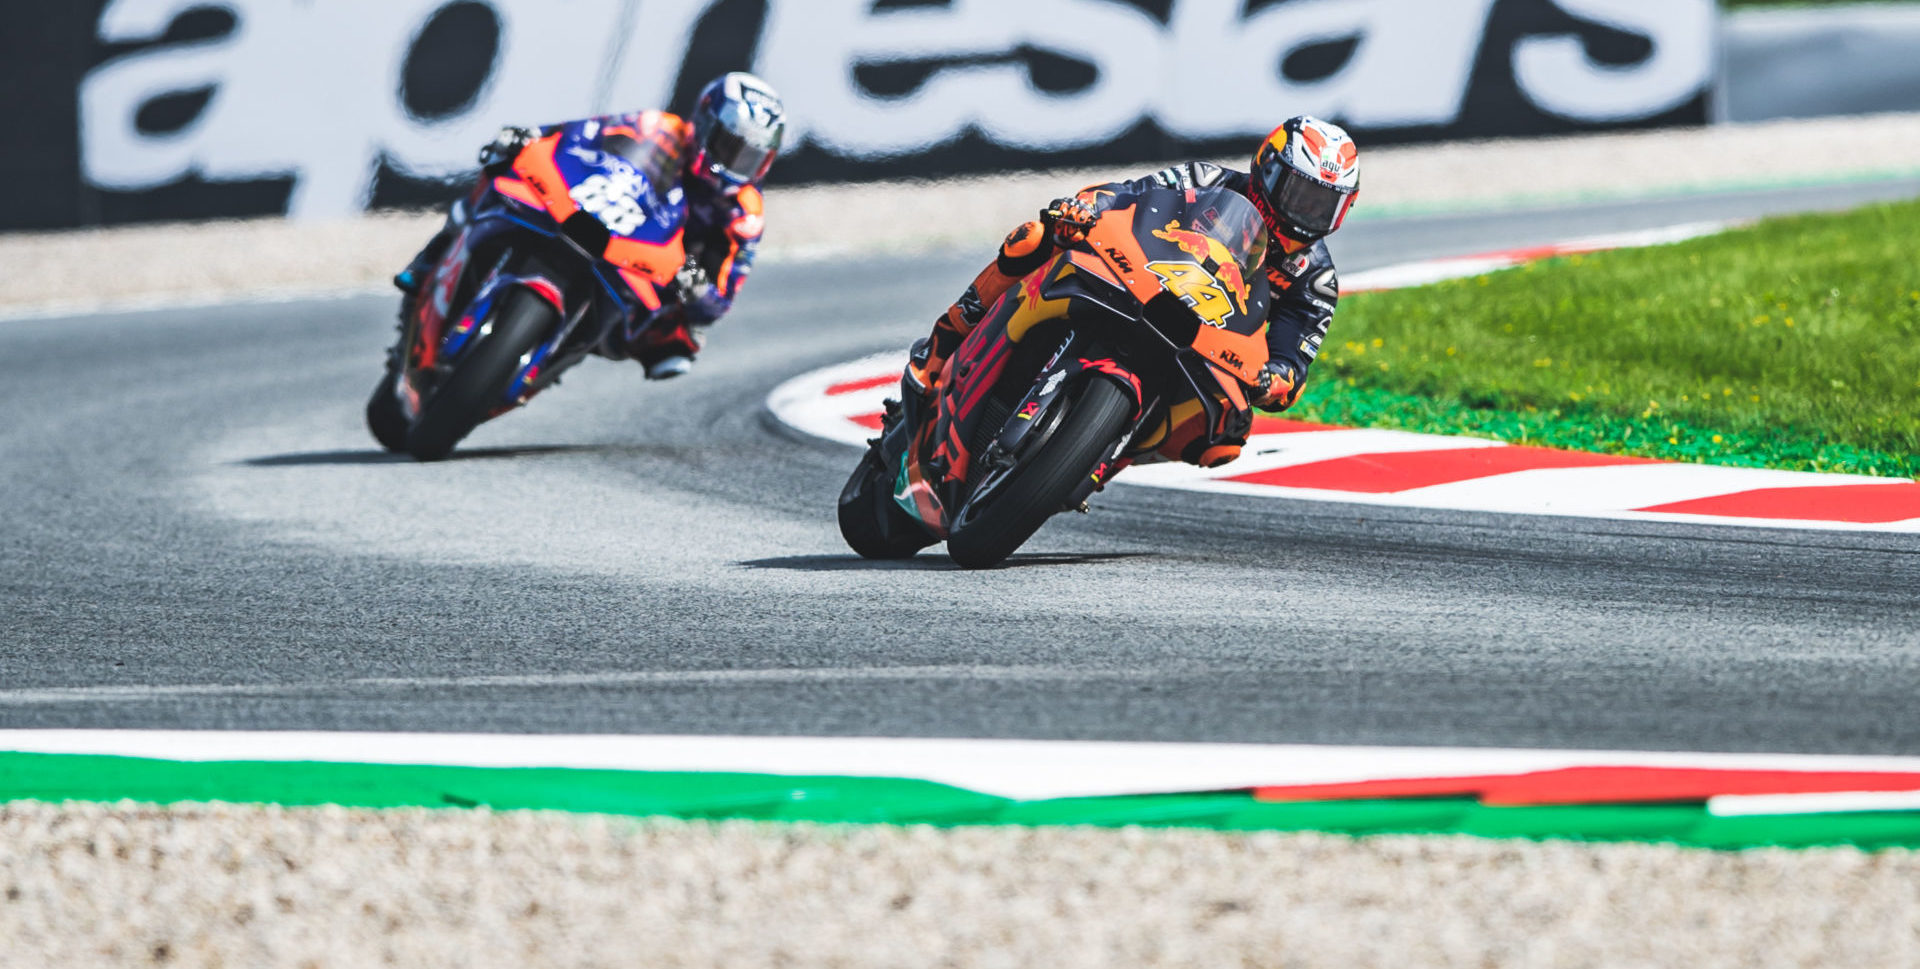 Pol Espargaro (44) and Miguel Oliveira (88) made contact and crashed during the MotoGP race in Austria. Photo by Polarity Photo, courtesy KTM.